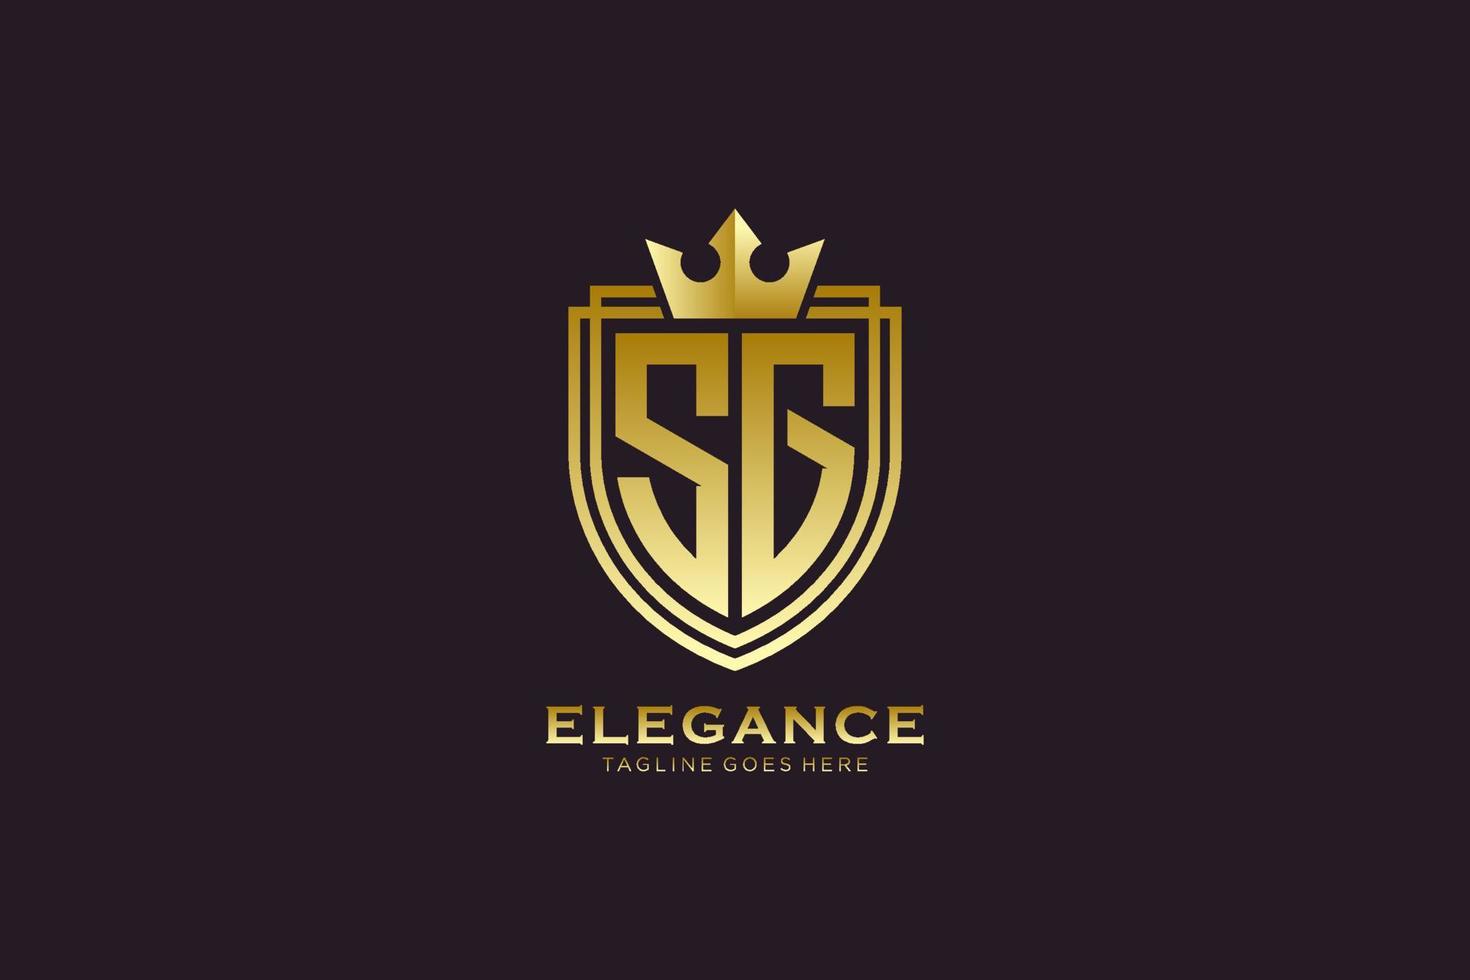 initial SG elegant luxury monogram logo or badge template with scrolls and royal crown - perfect for luxurious branding projects vector